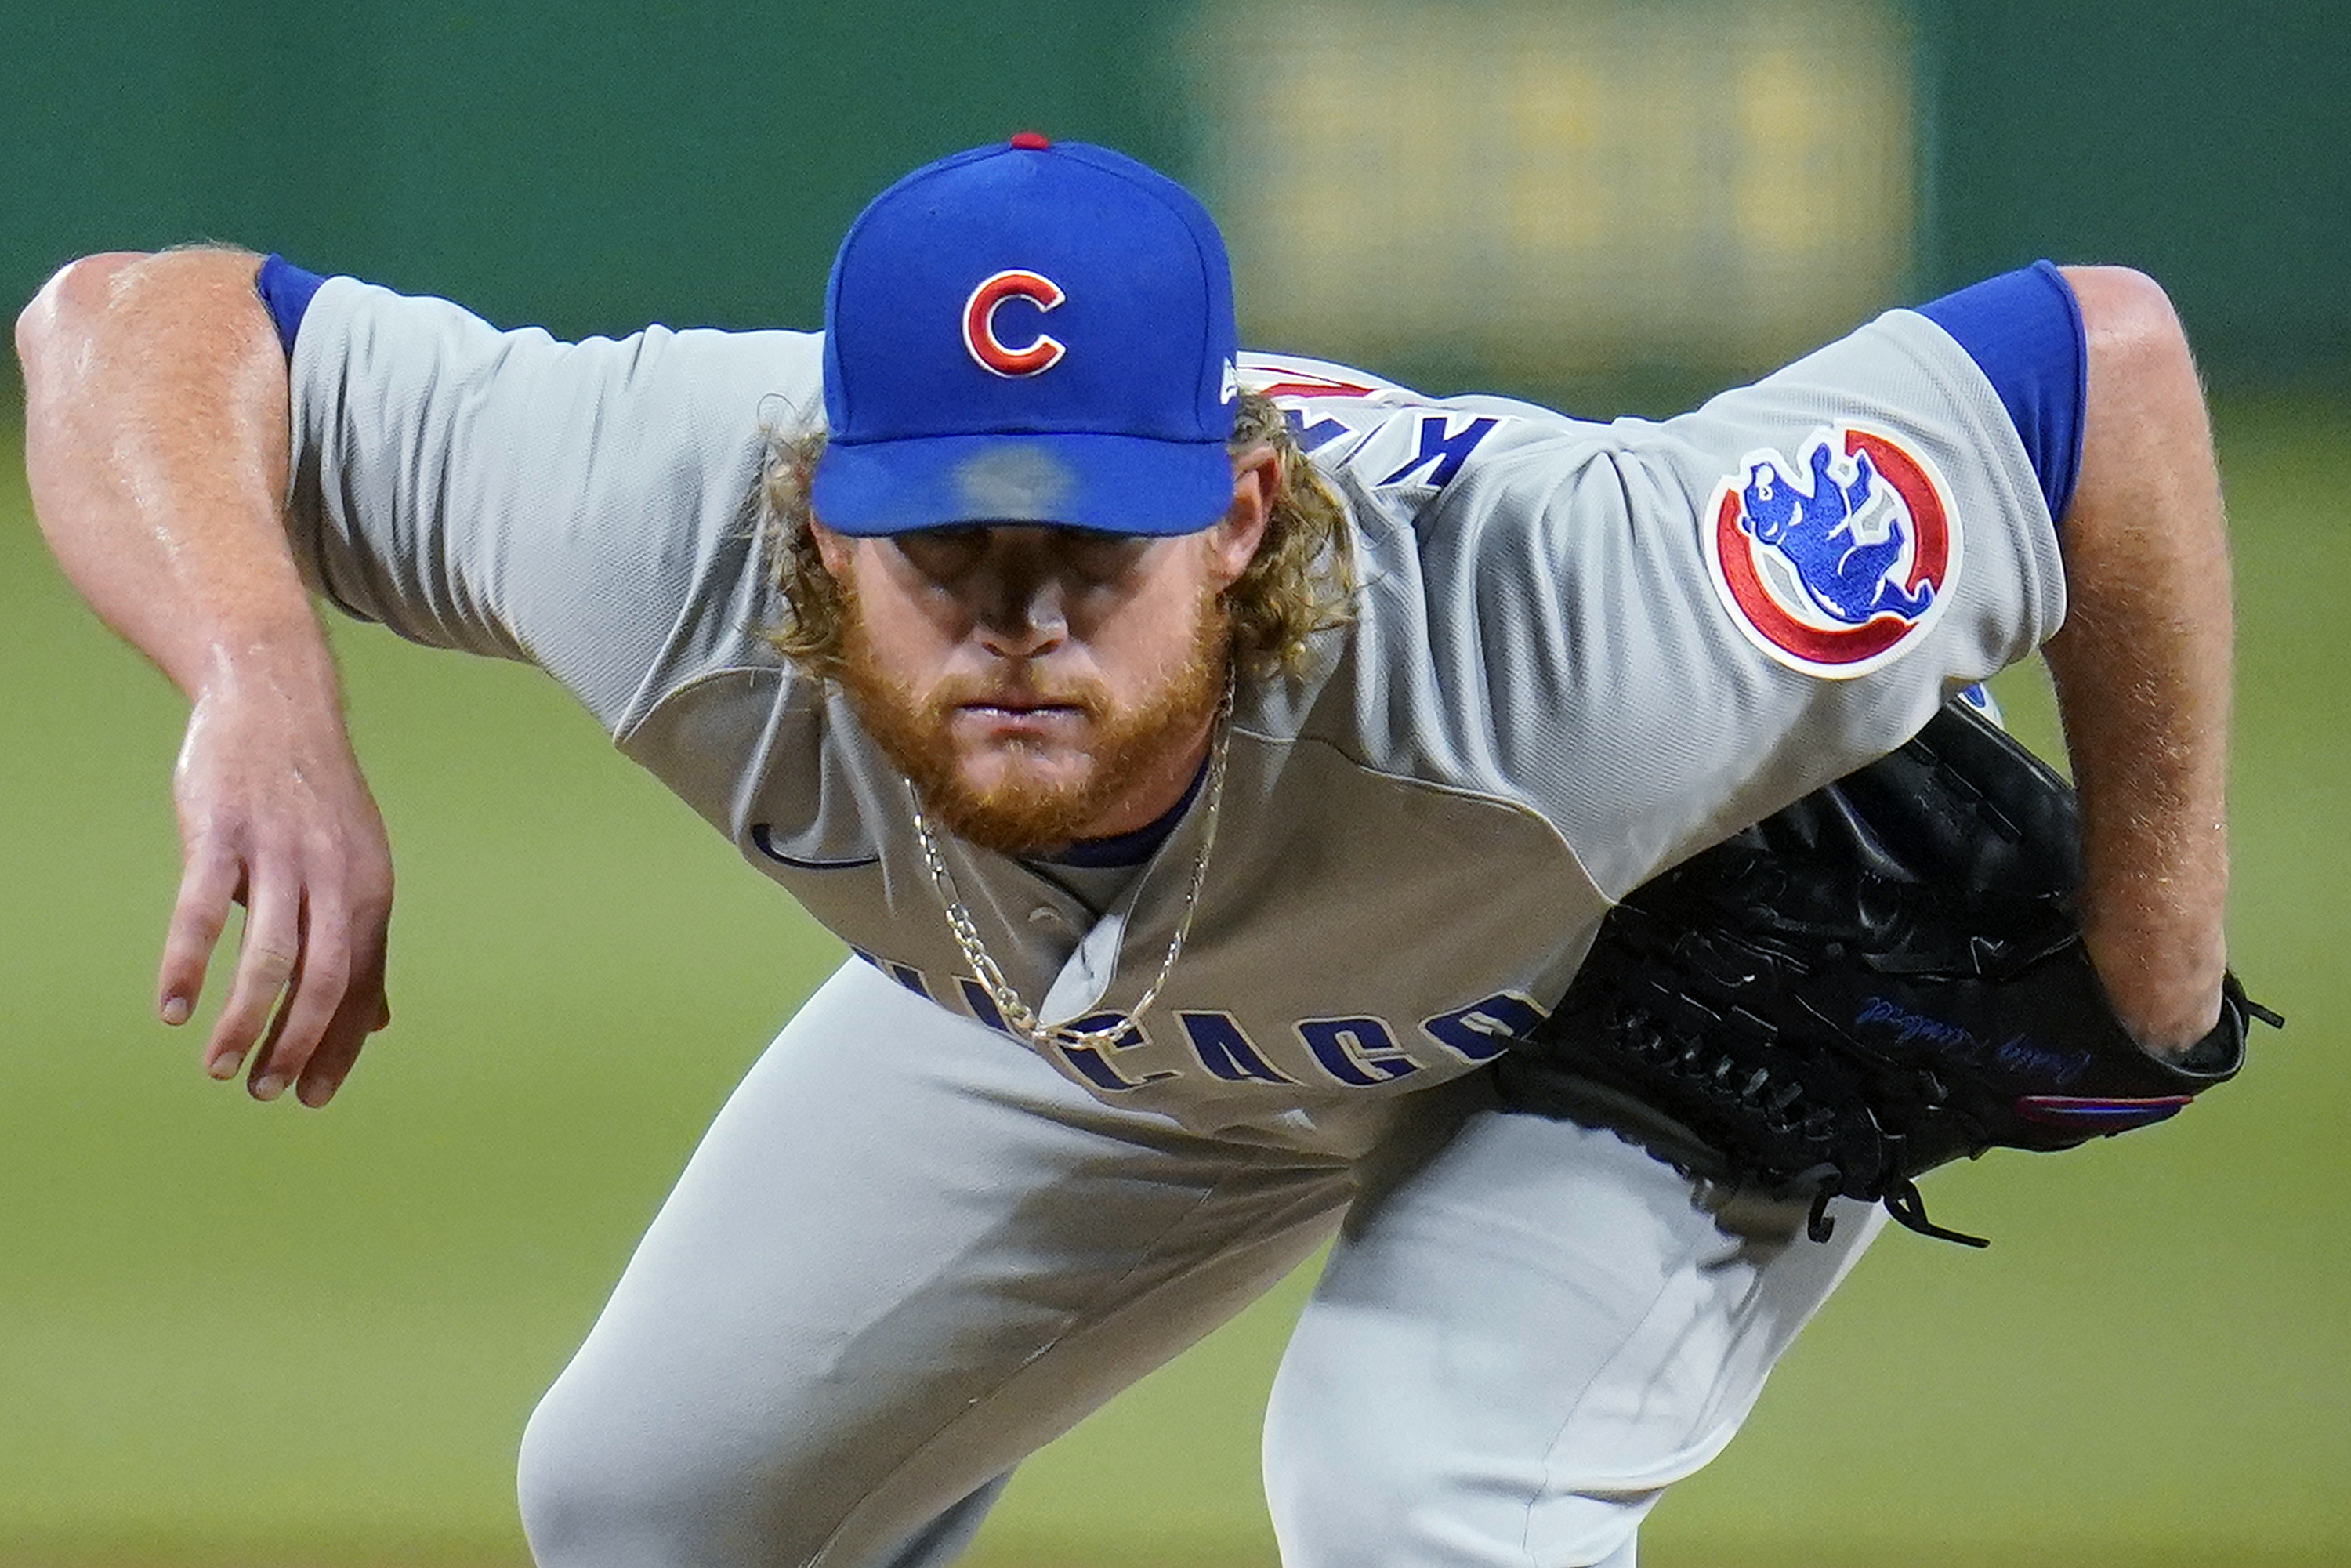 Craig Kimbrel Can Be Great Again Next Year!  But the Cubs Can't